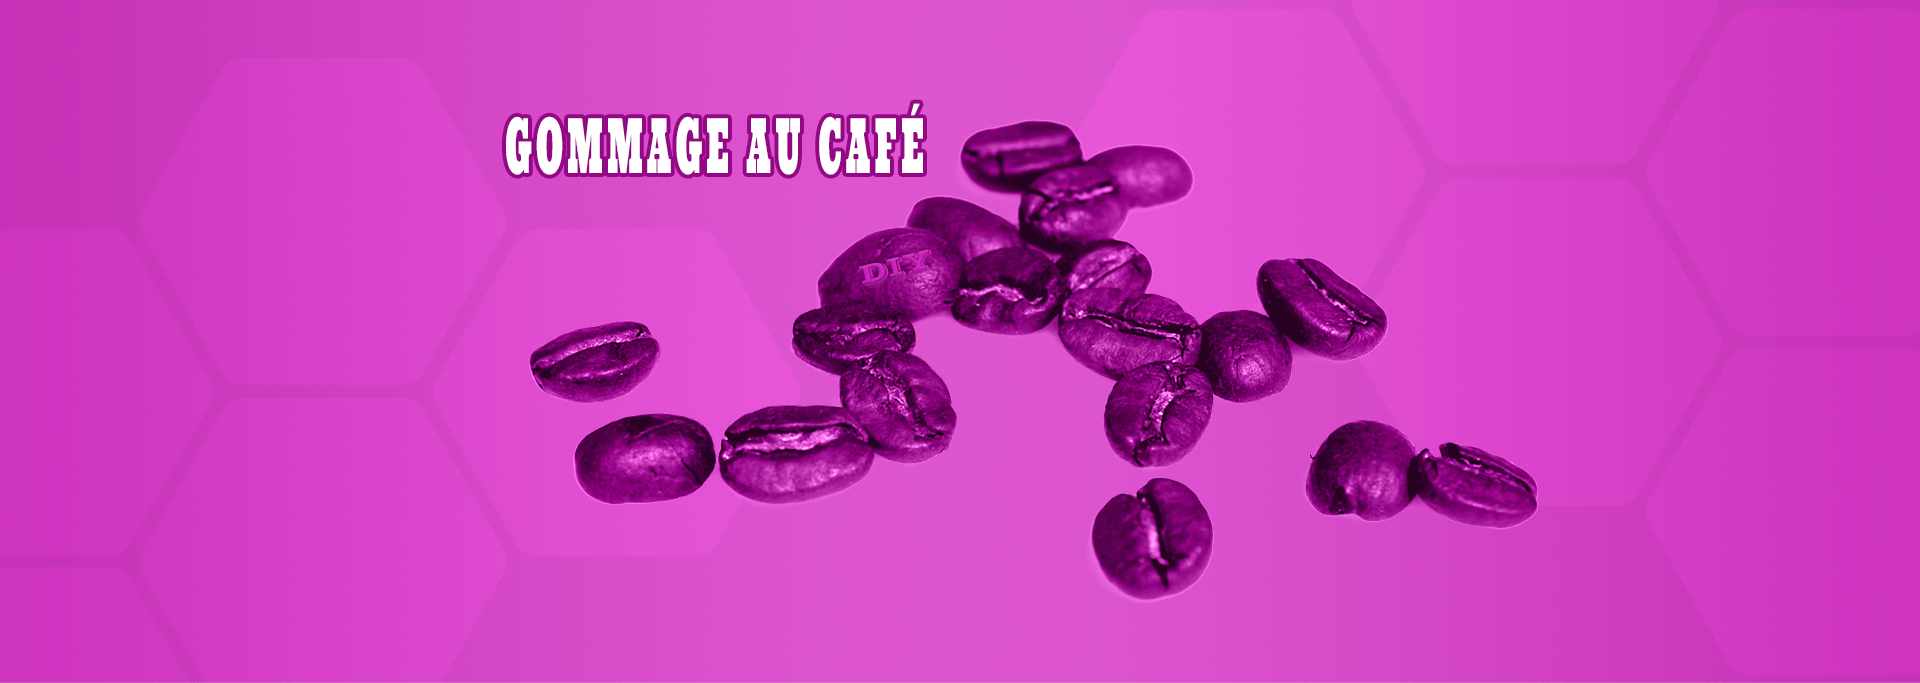 diy gommage anti cellulite cafe